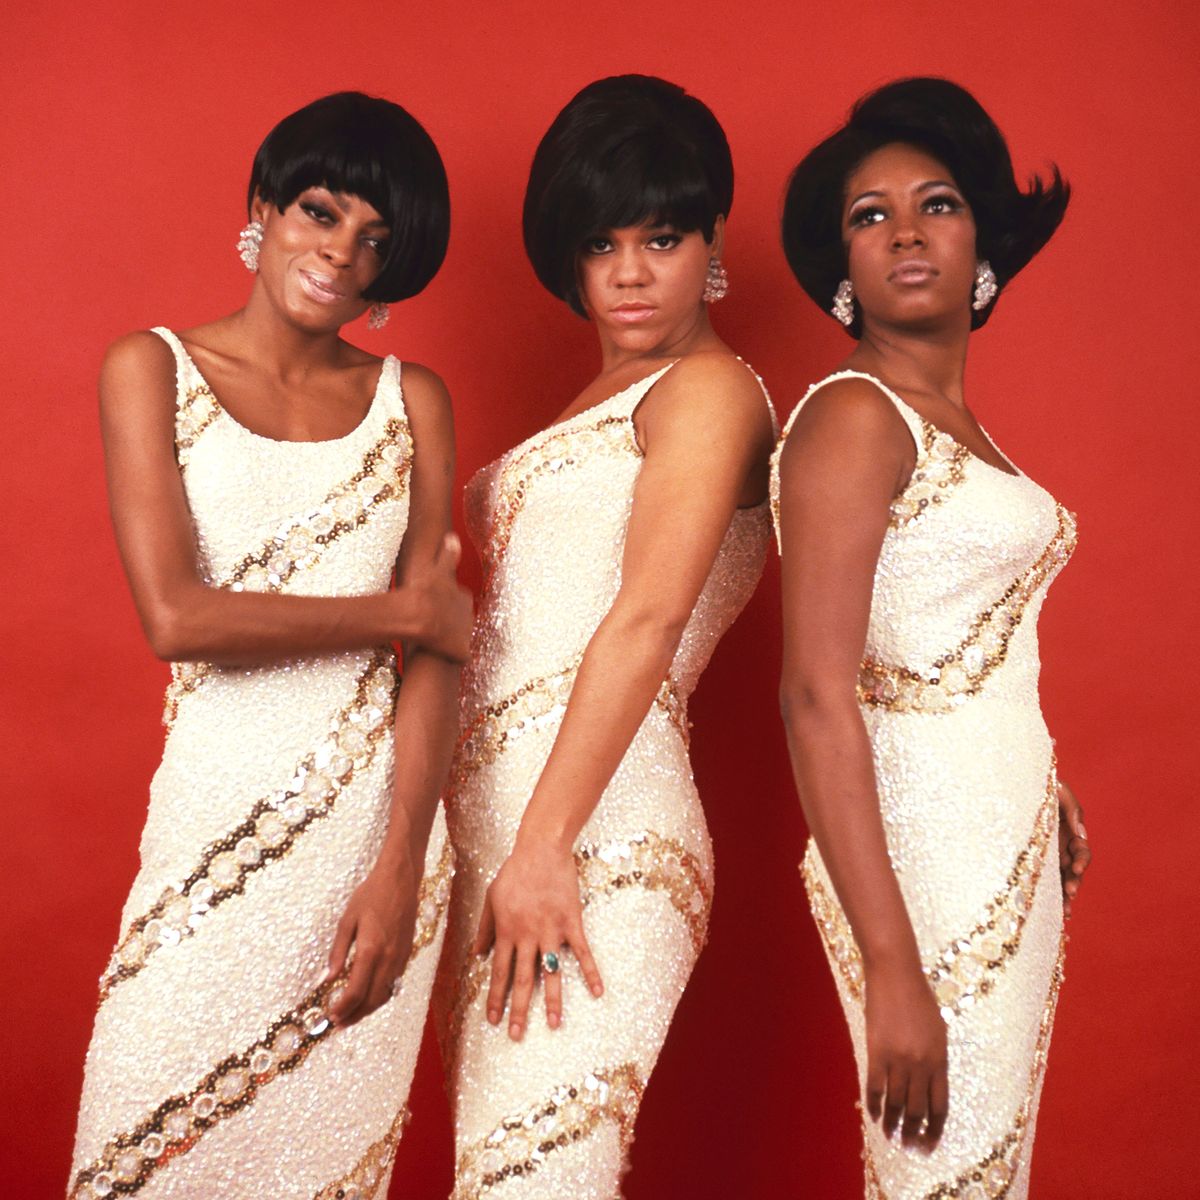 Diana Ross and The Supremes in their prime. Well groomed by the Motown school of professionalism